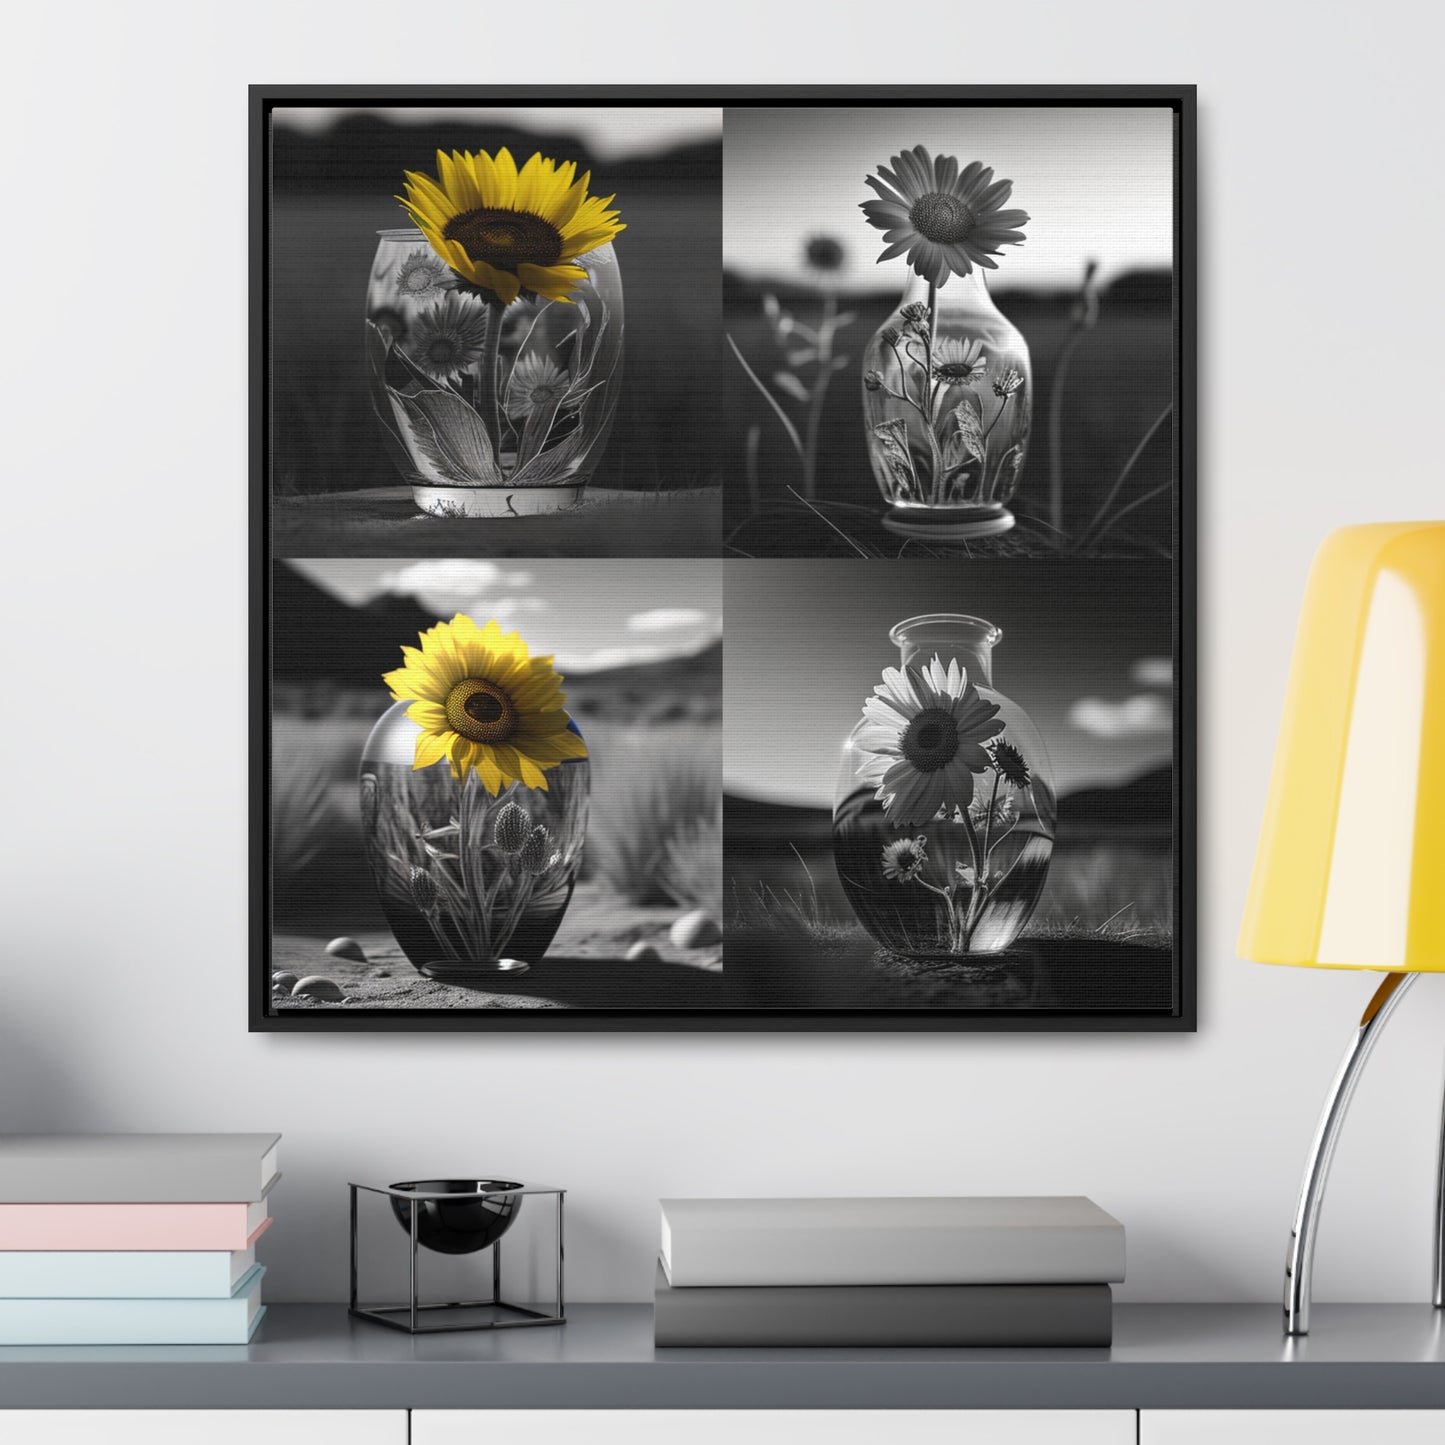 Gallery Canvas Wraps, Square Frame Yellw Sunflower in a vase 5